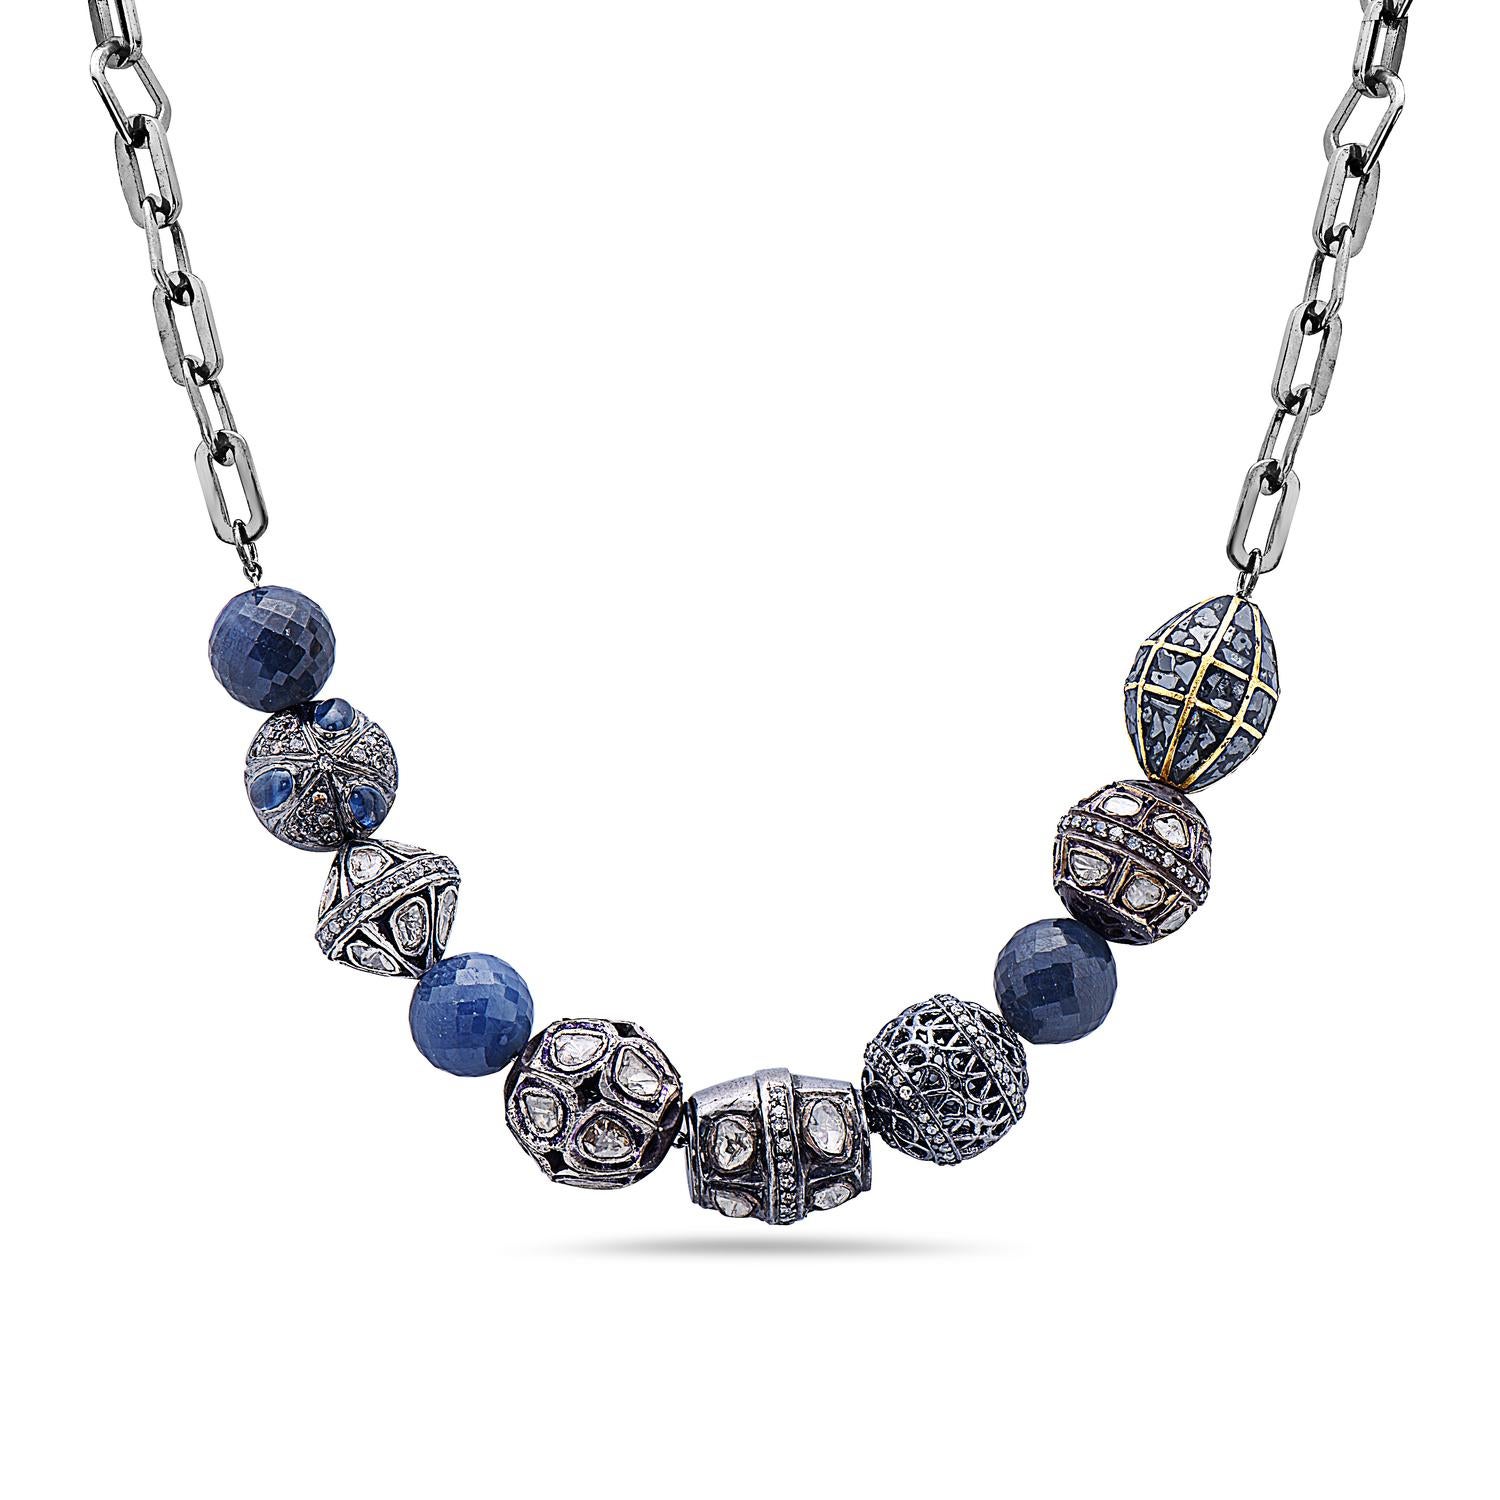 Designer Sapphire and Silver and Diamond Beaded Necklace with Link Chain is 32 inch long and can be layered with smaller chains on top. It's pretty and boho style.

Silver:40.51gms
Diamond:6.55cts
Sapphire:33.45cts
